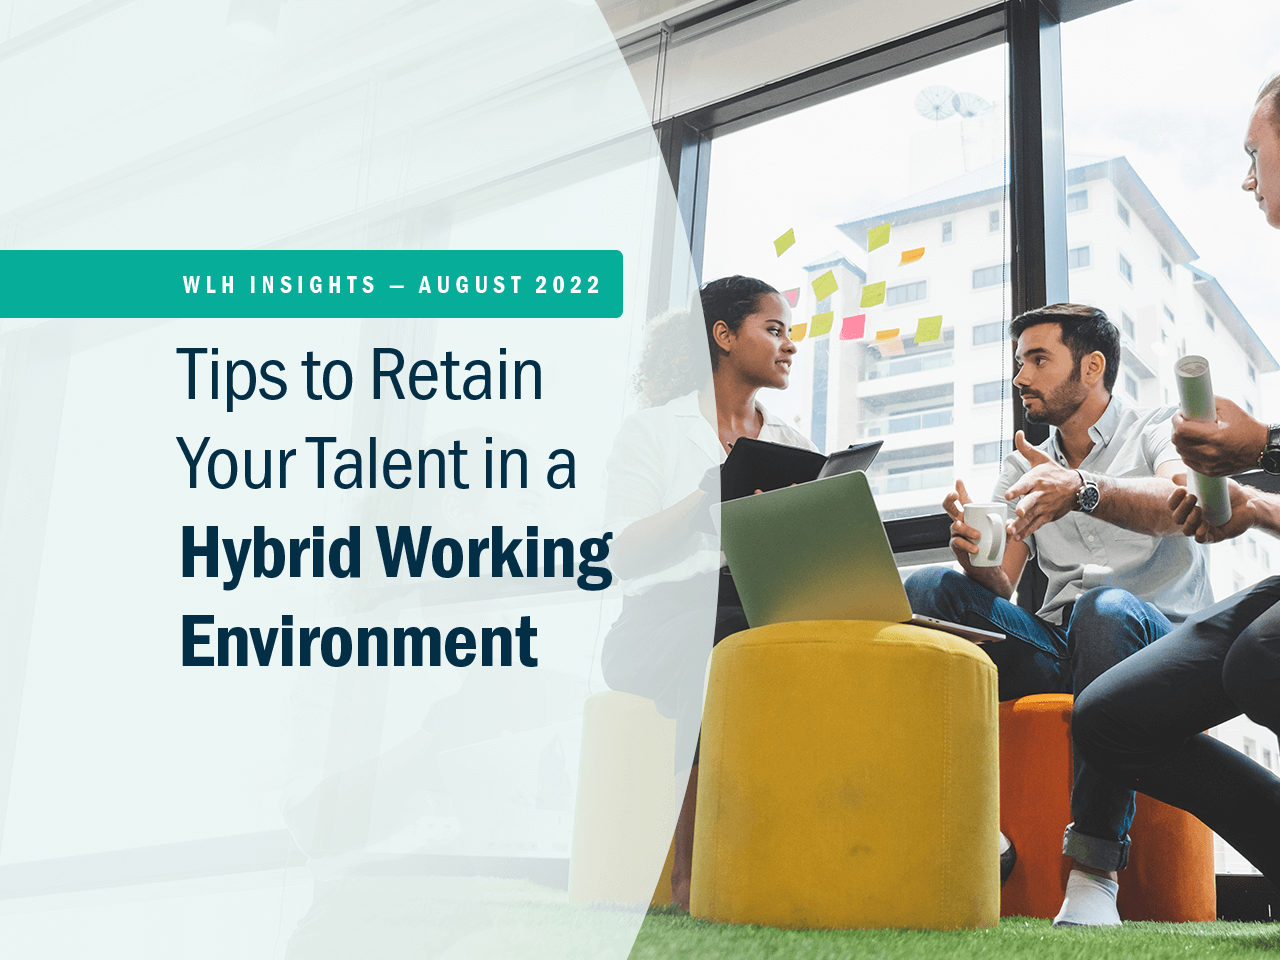 Tips to Retain Your Talent in a Hybrid Working Environment